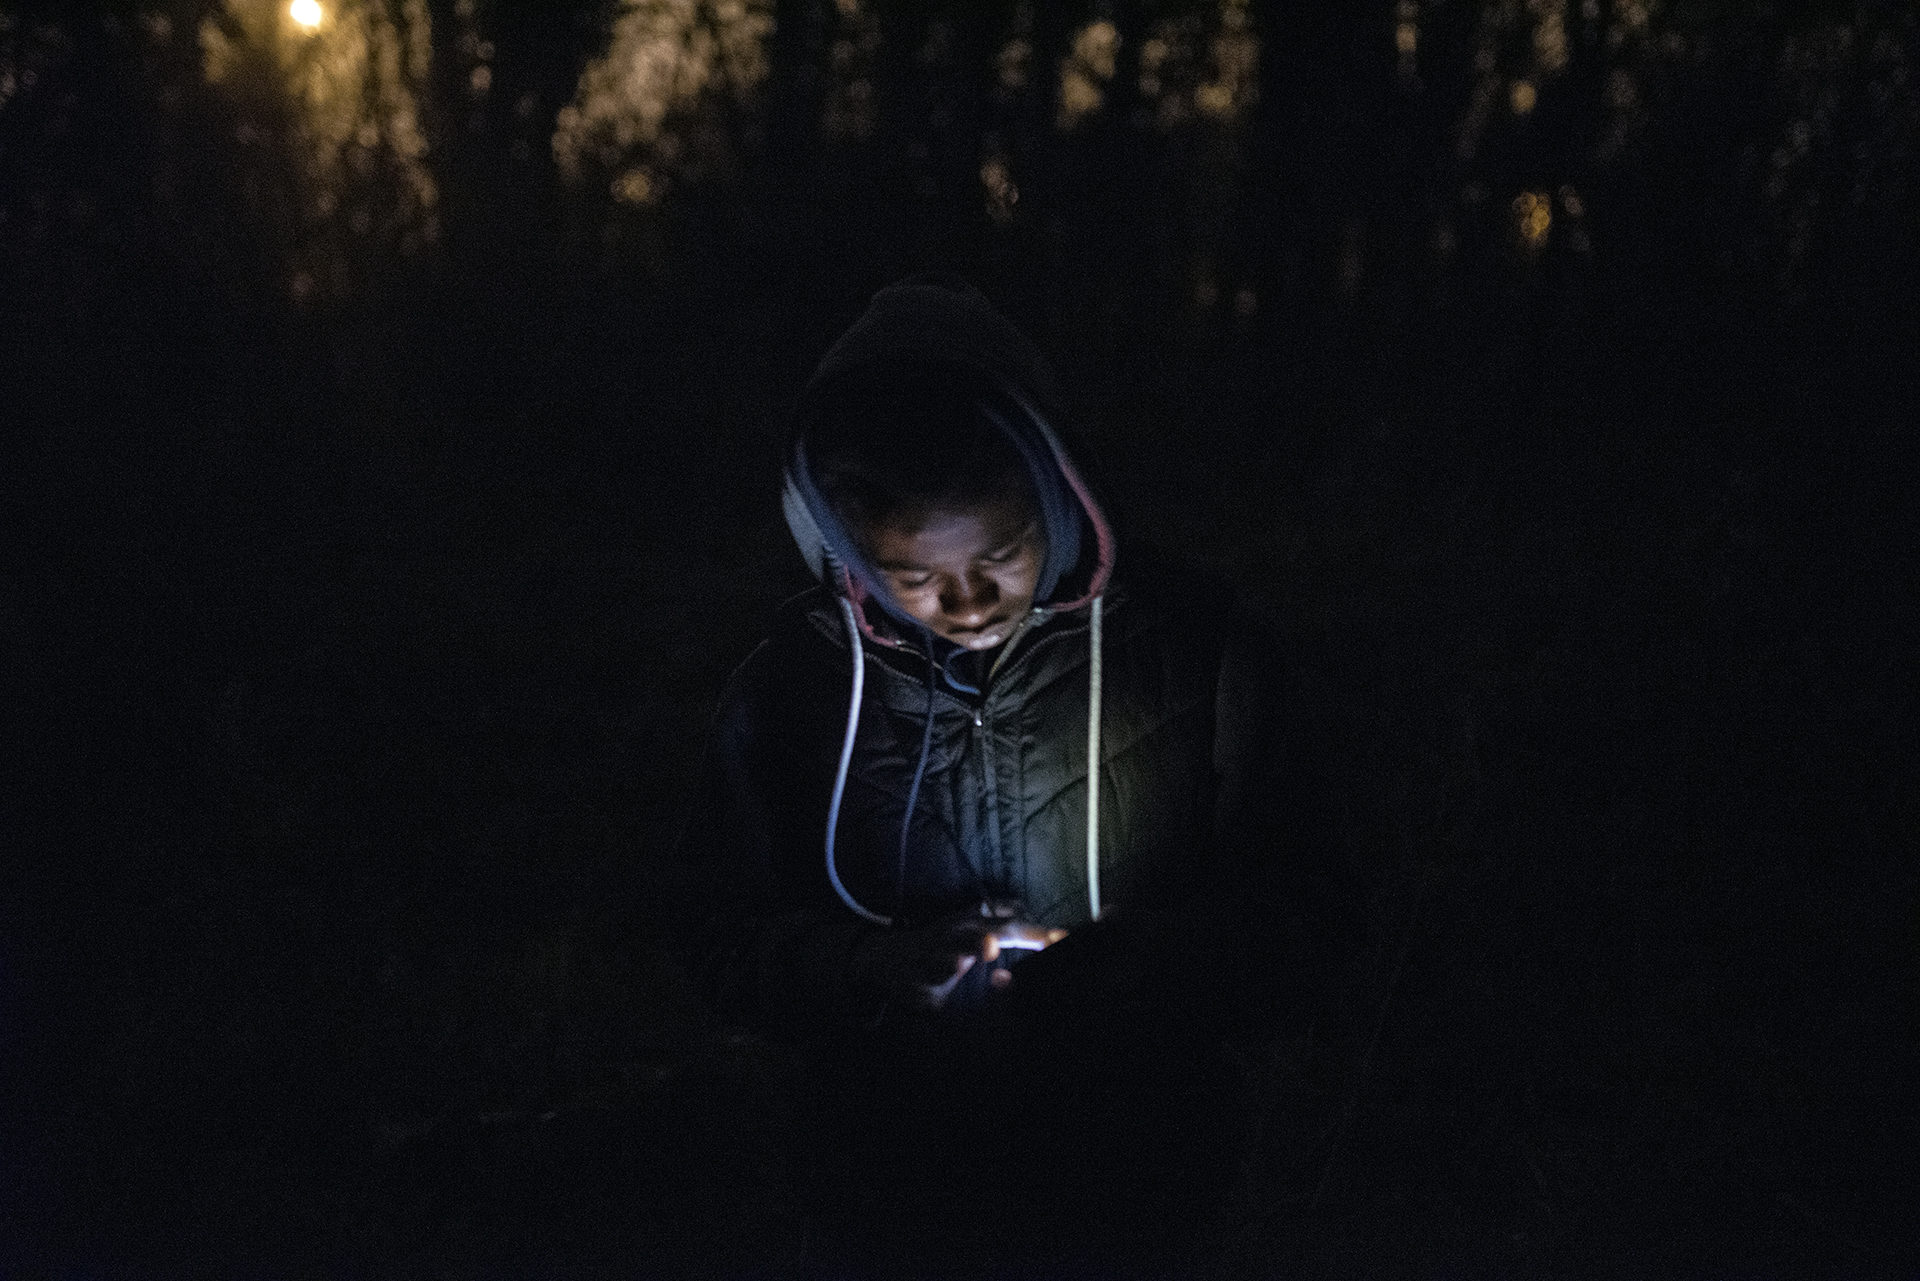 A young Sudanese man camping around the bunker in Calais uses his mobile phone in the pitch black [Guillem Trius/Al Jazeera]